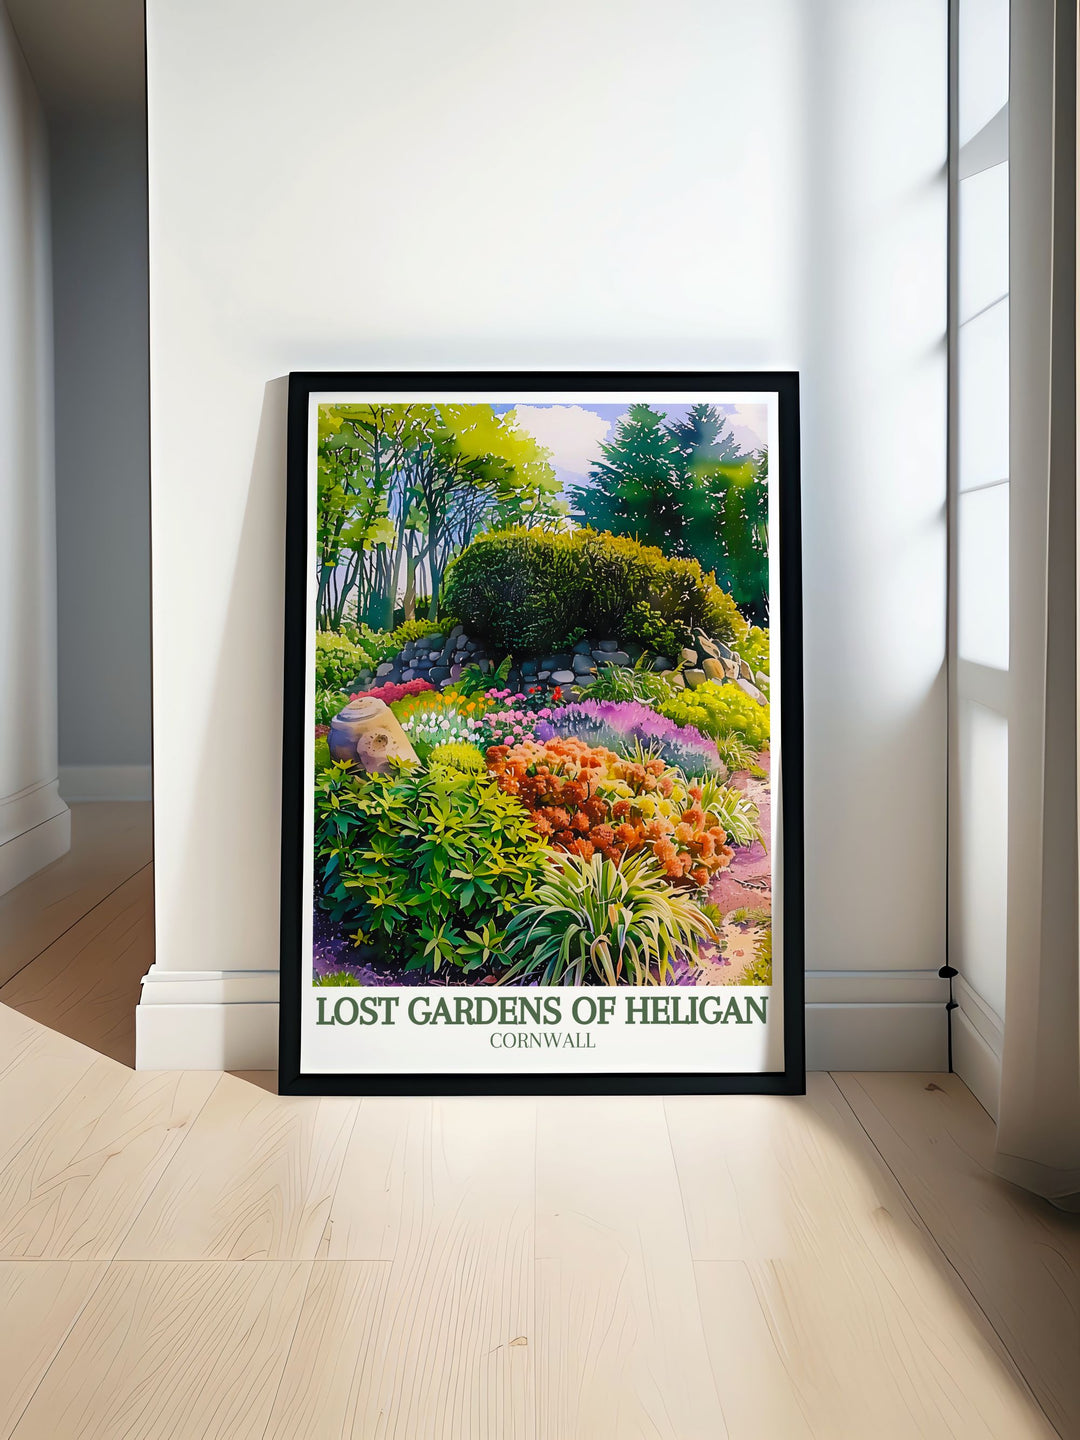 Stunning Cornwall wall art featuring the Lost Gardens Heligan and Italian garden Productive gardens perfect for adding a touch of natural beauty to your home decor with vibrant colors and intricate details showcasing Cornwalls coastal charm and lush greenery